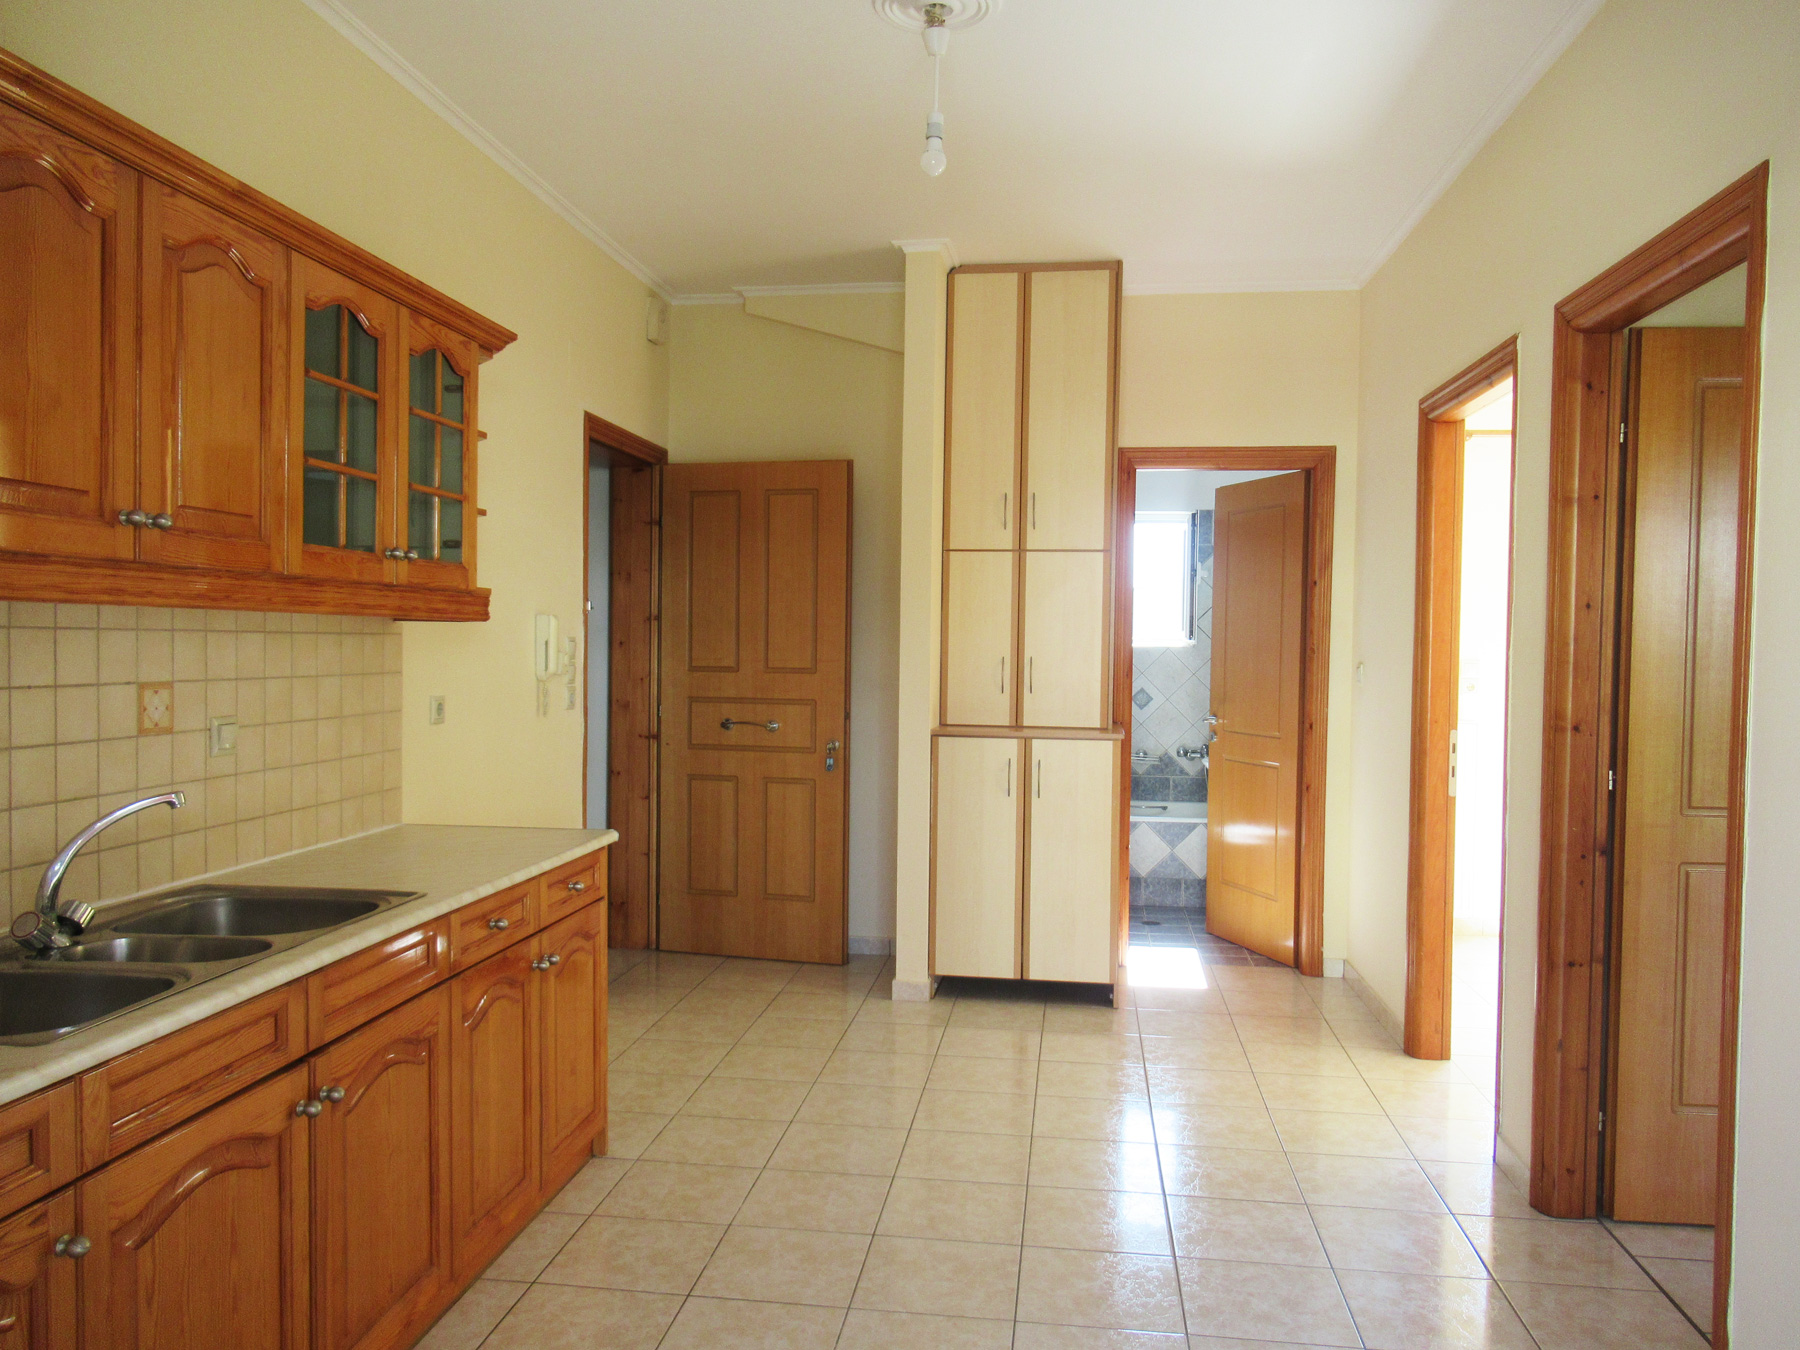 For rent small 3 bedroom apartment of 60 sq.m. on the 1st floor near the center of Ioannina.